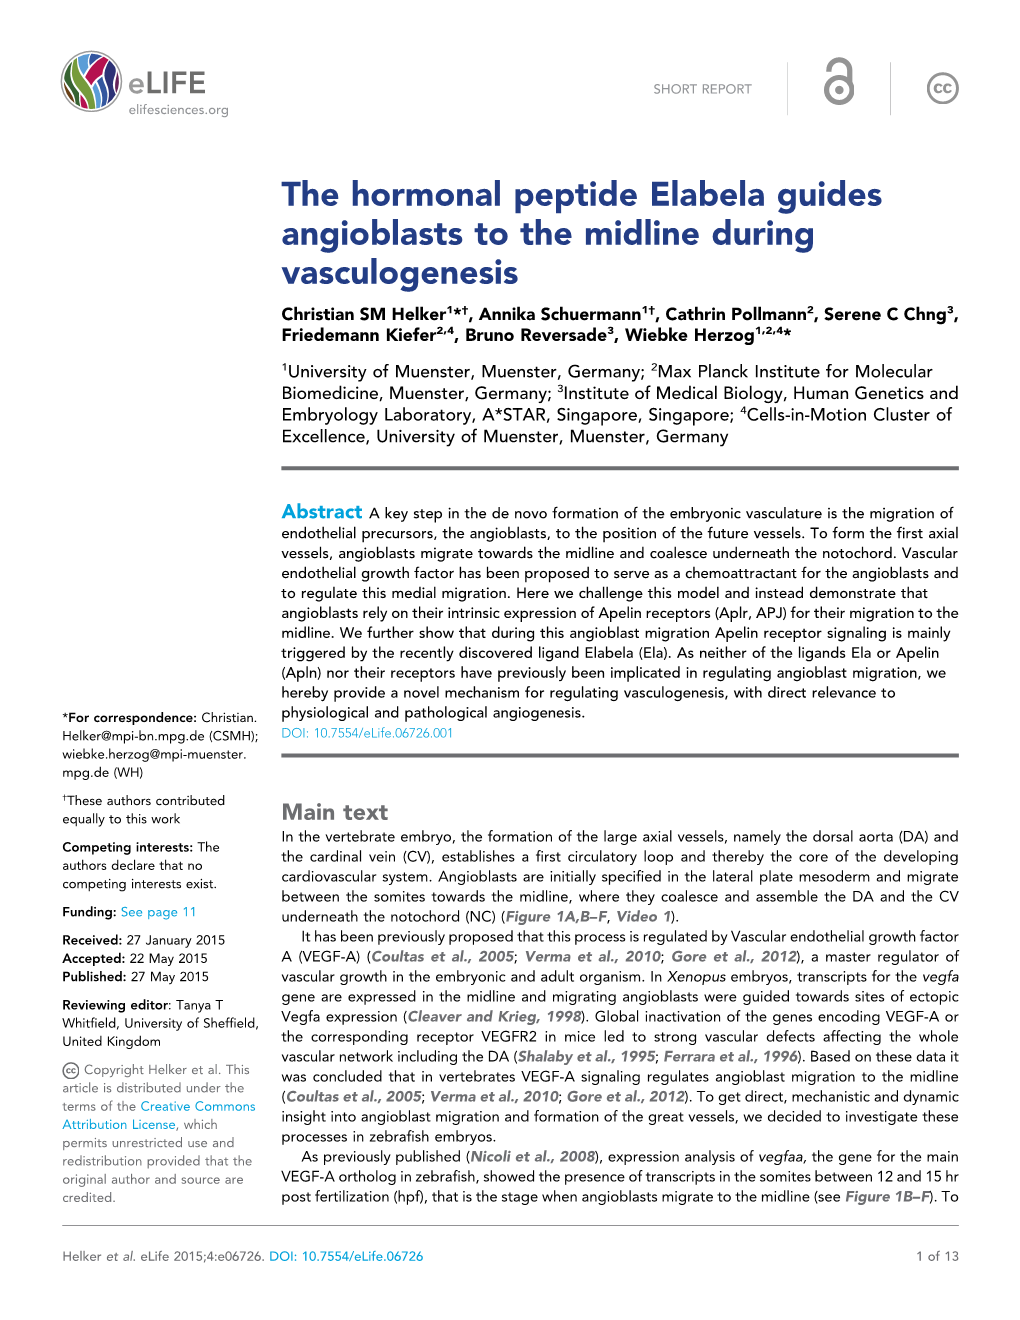 The Hormonal Peptide Elabela Guides Angioblasts to the Midline